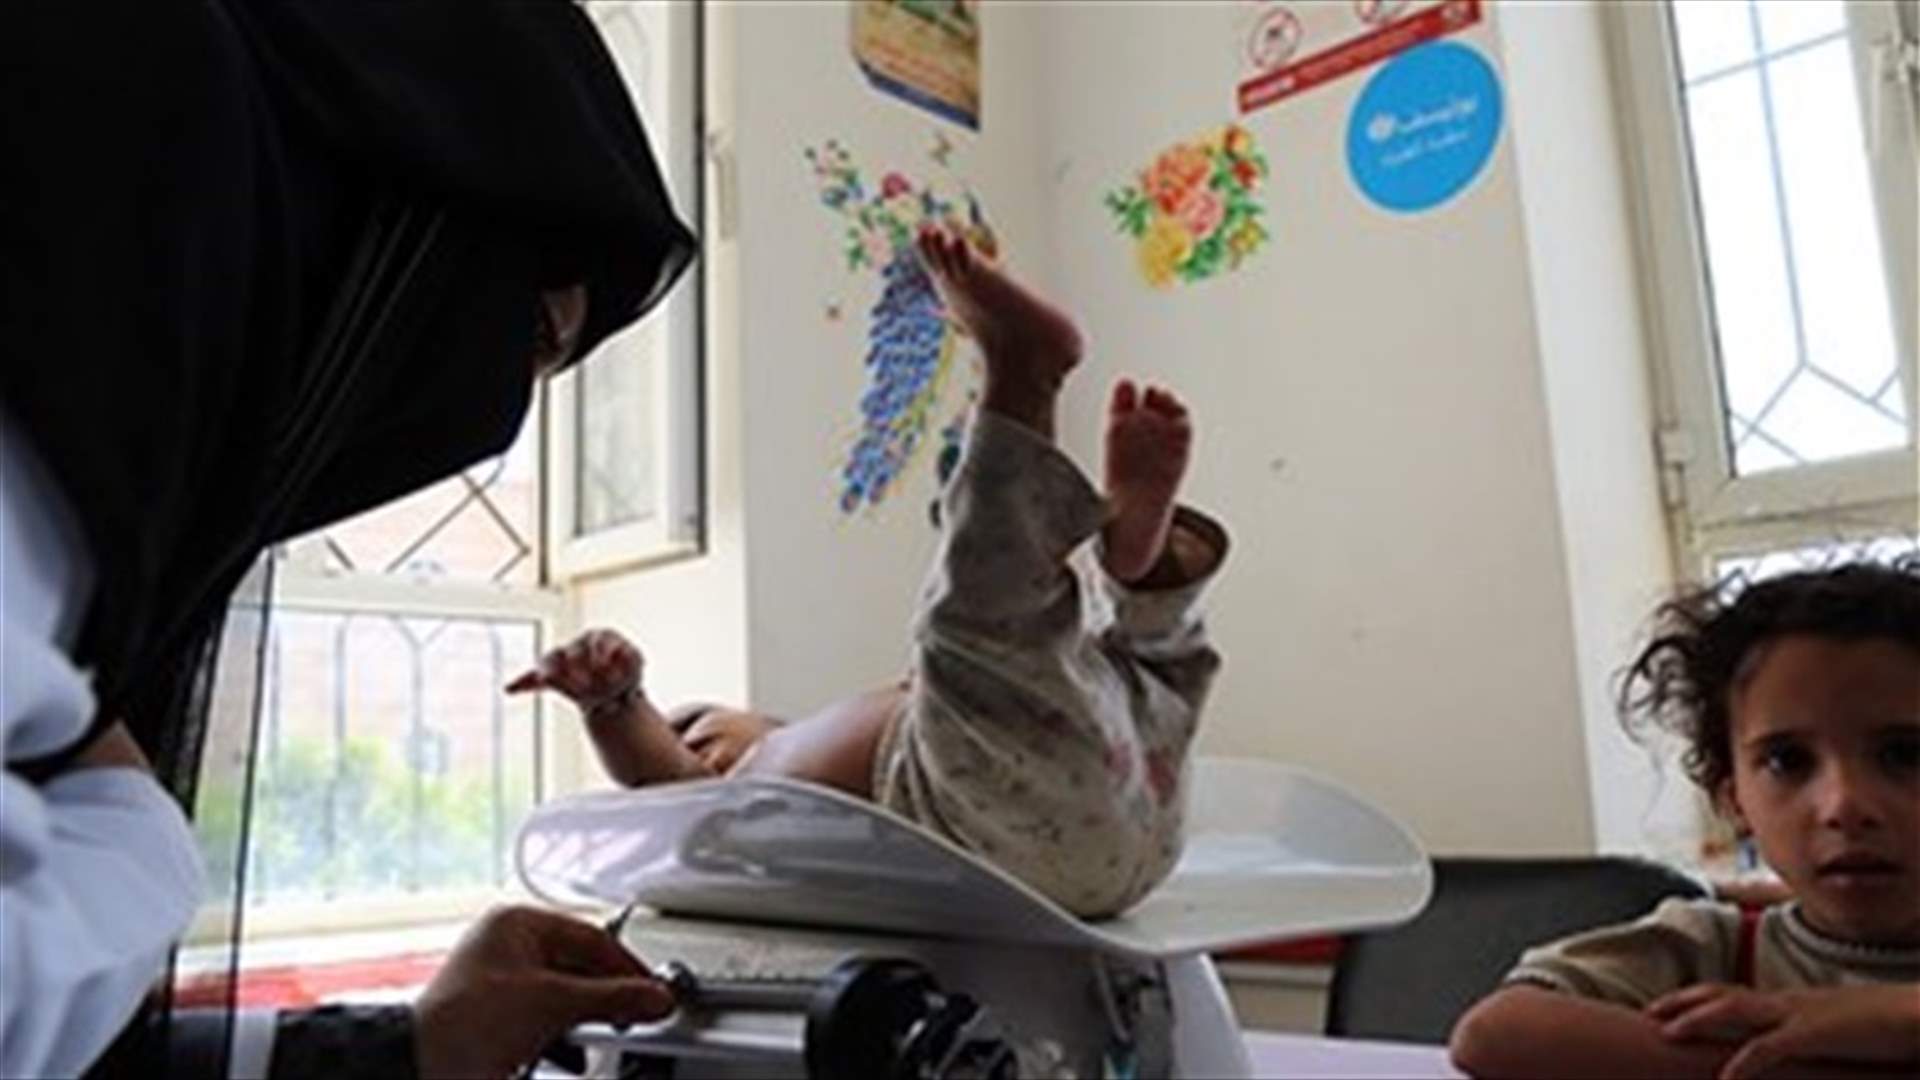 Child malnutrition at &quot;all time high&quot; in Yemen - UN agency